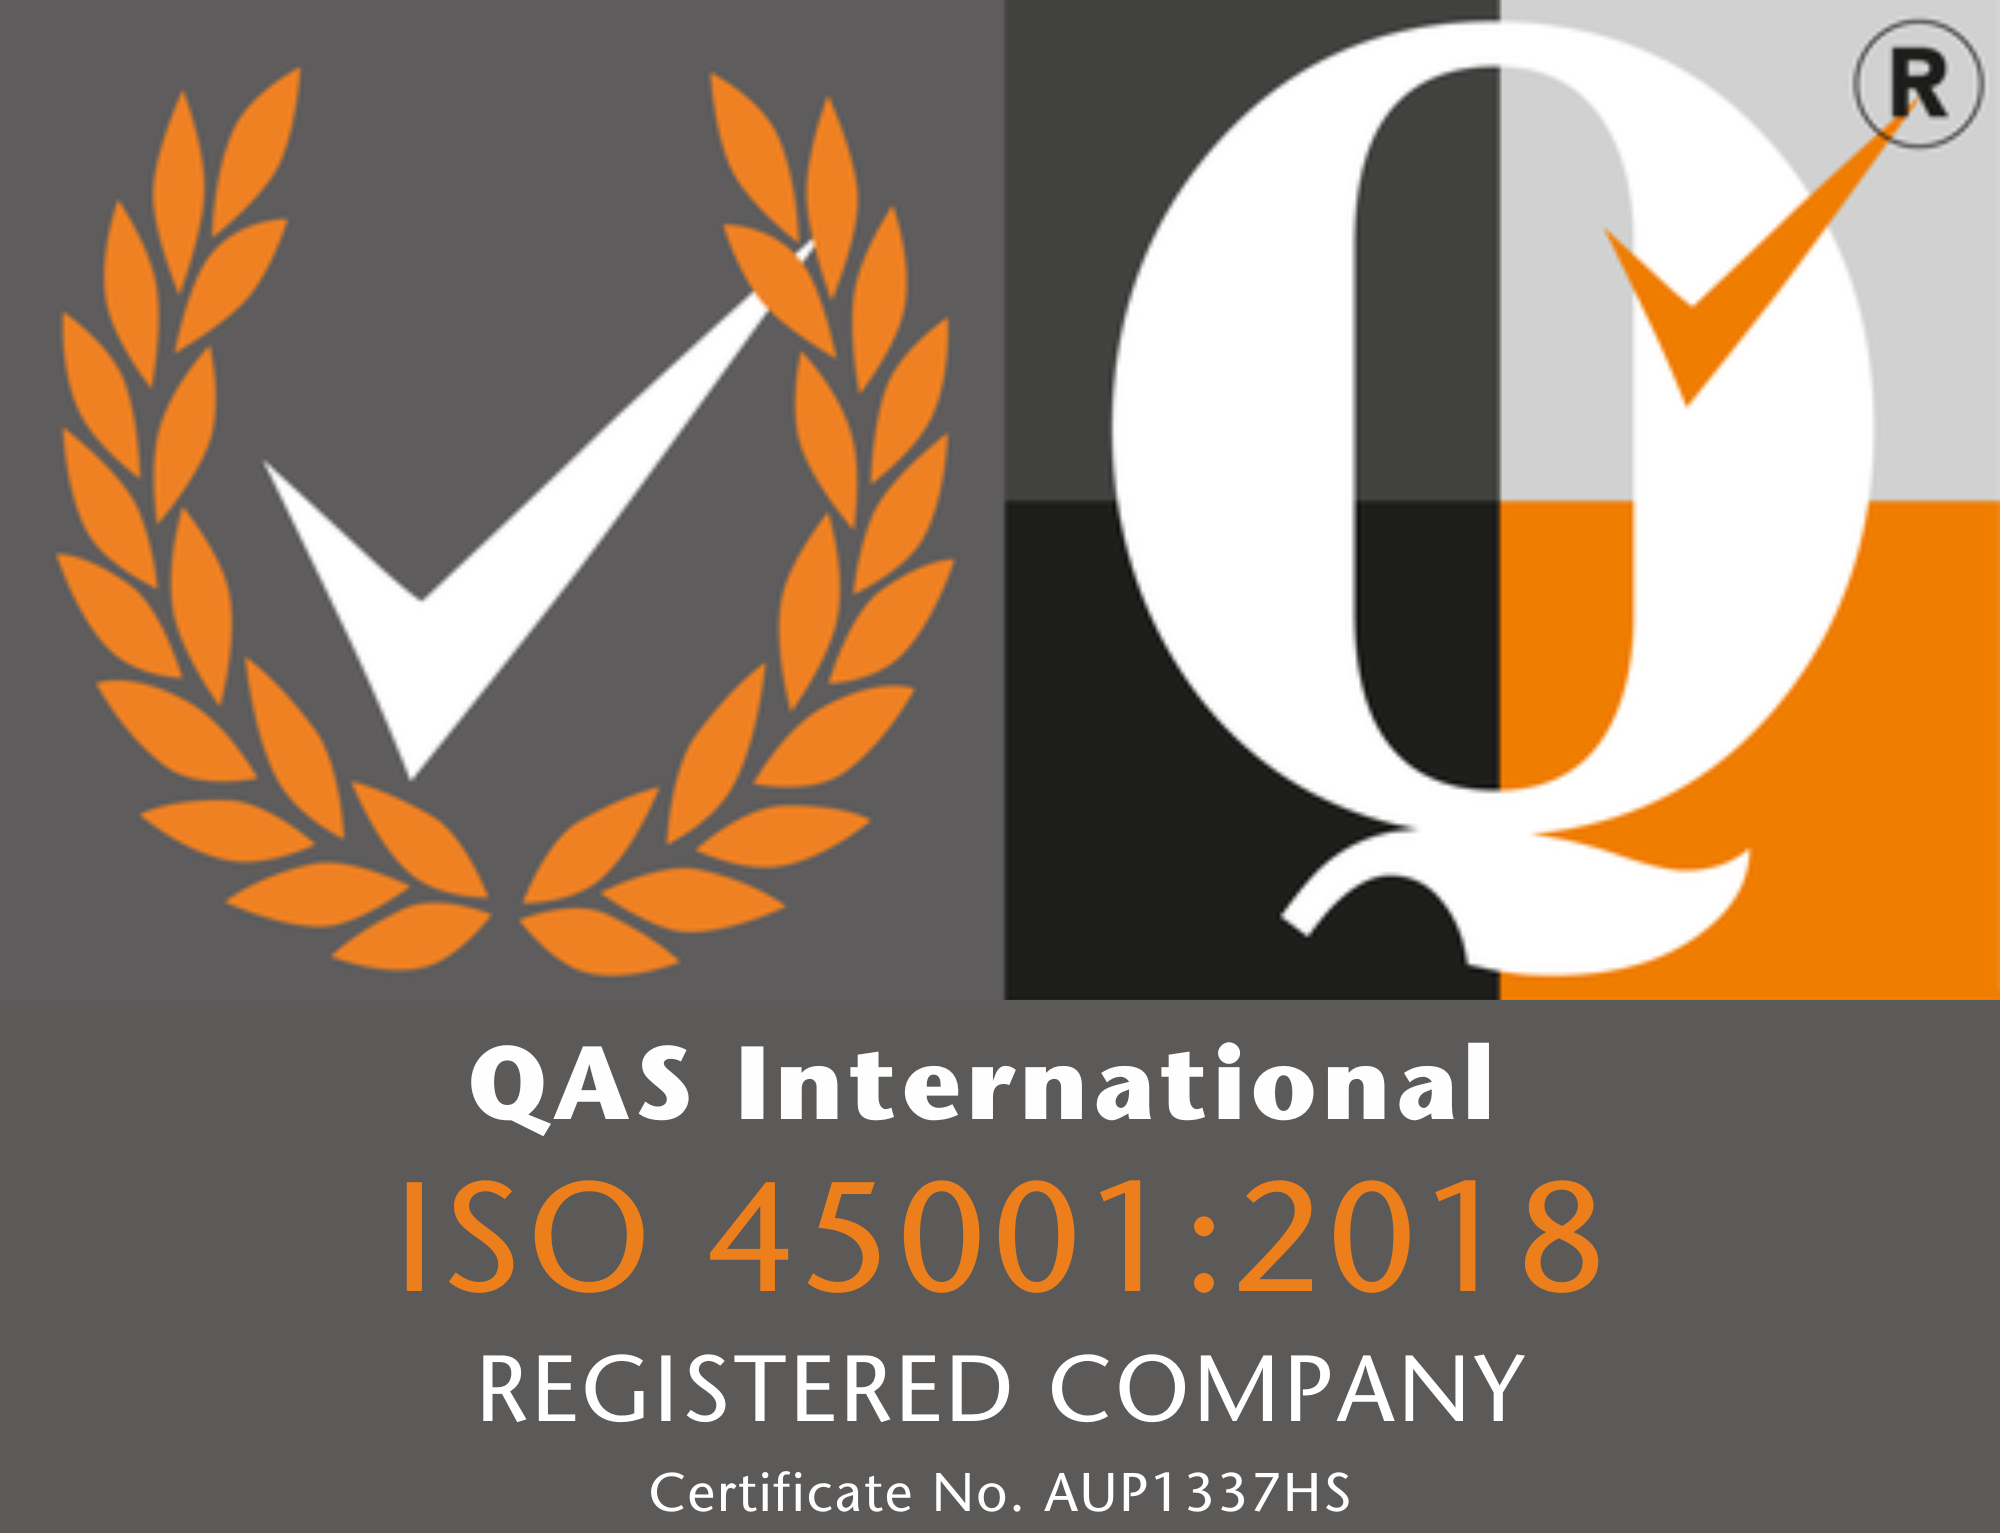 ISO 45001 – Occupational Health & Safety